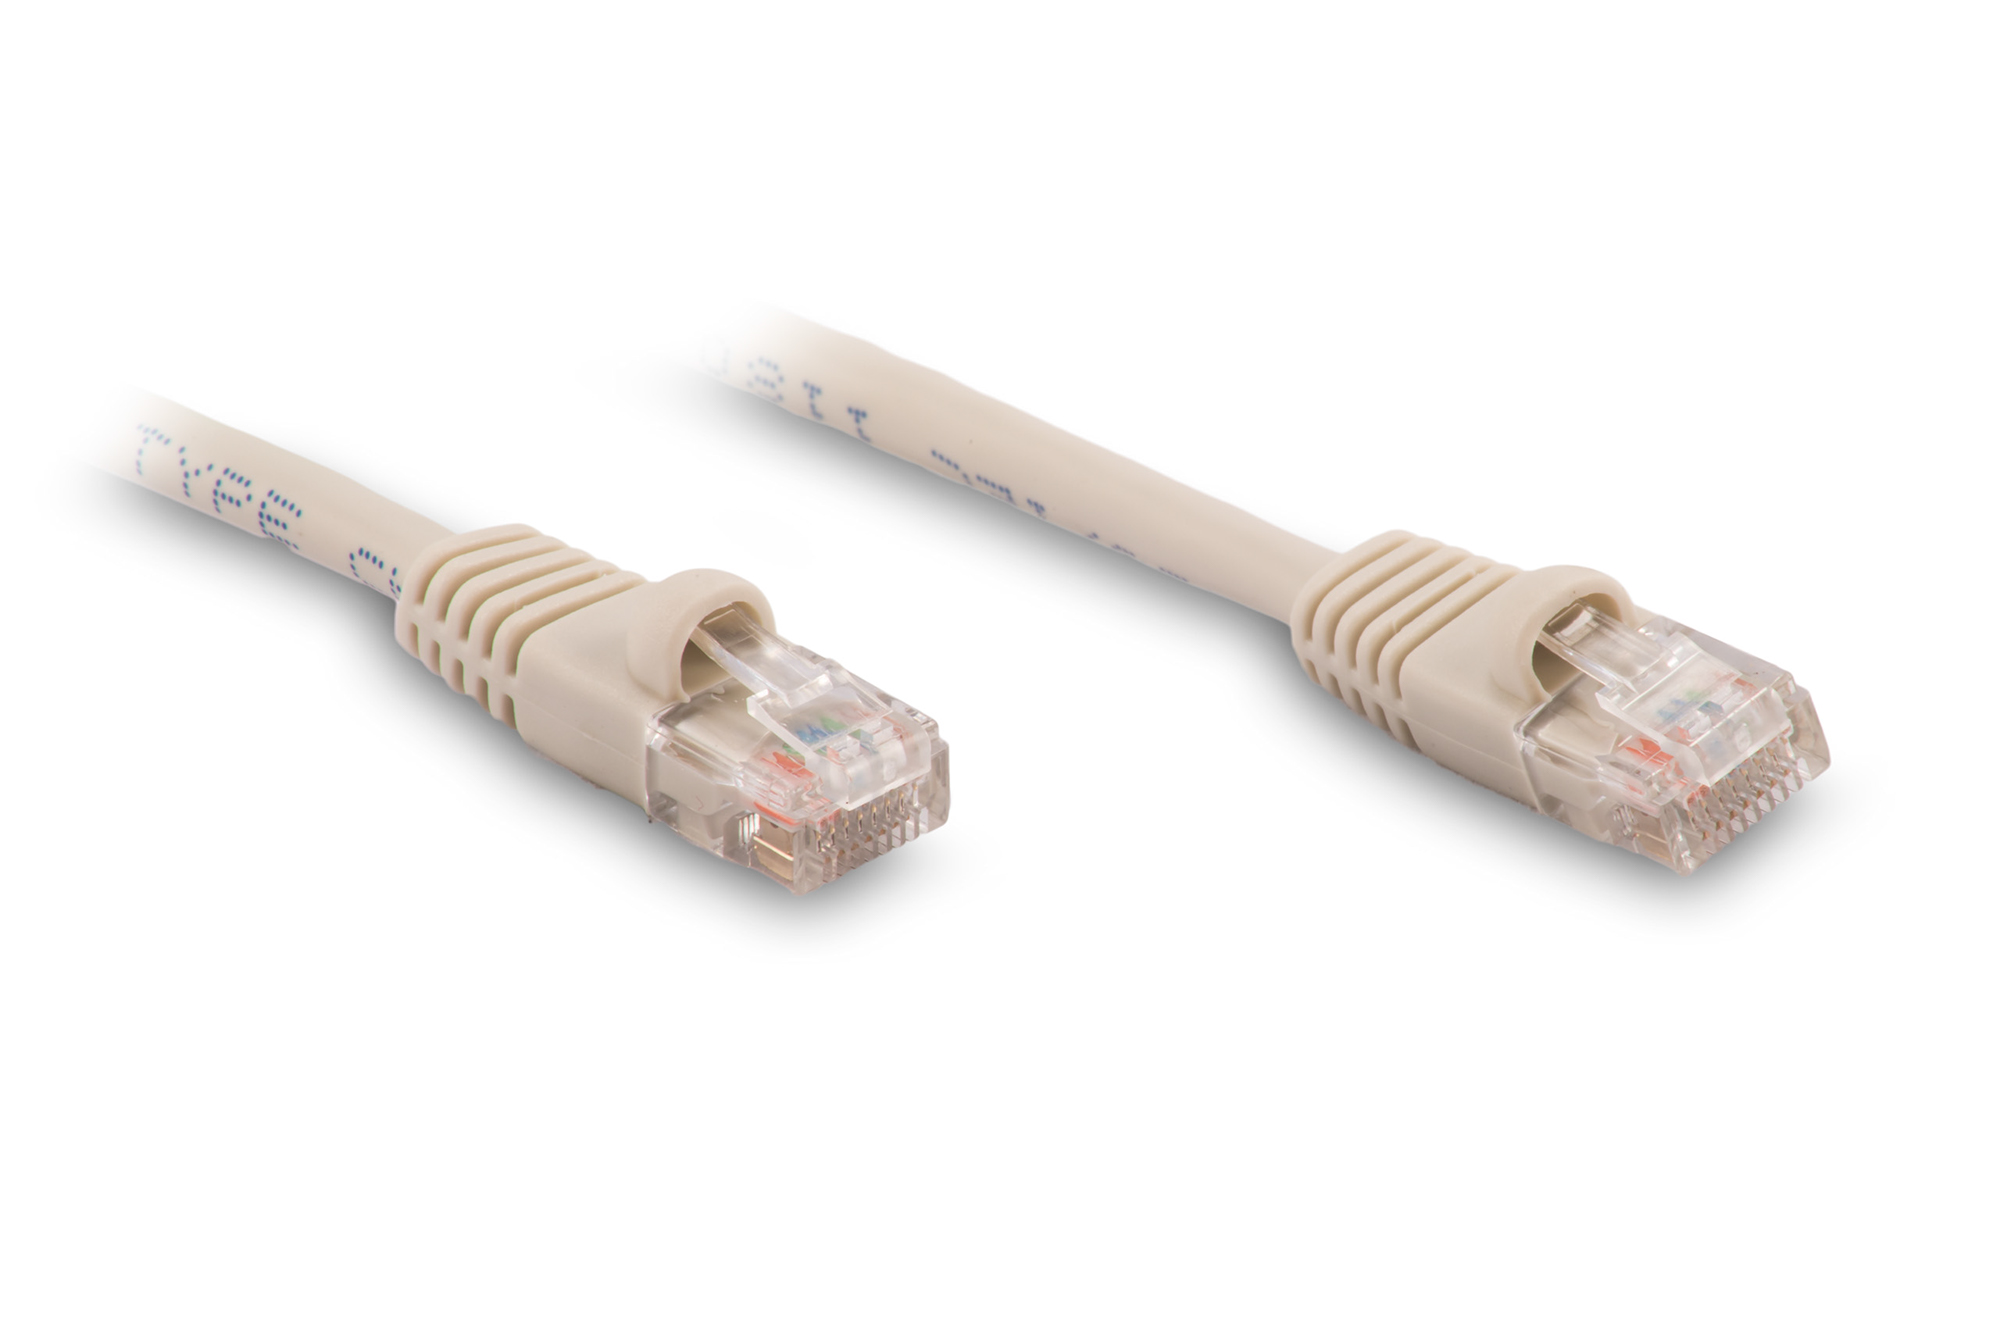 2ft Cat6 Ethernet Patch Cable - Gray Color - Snagless Boot